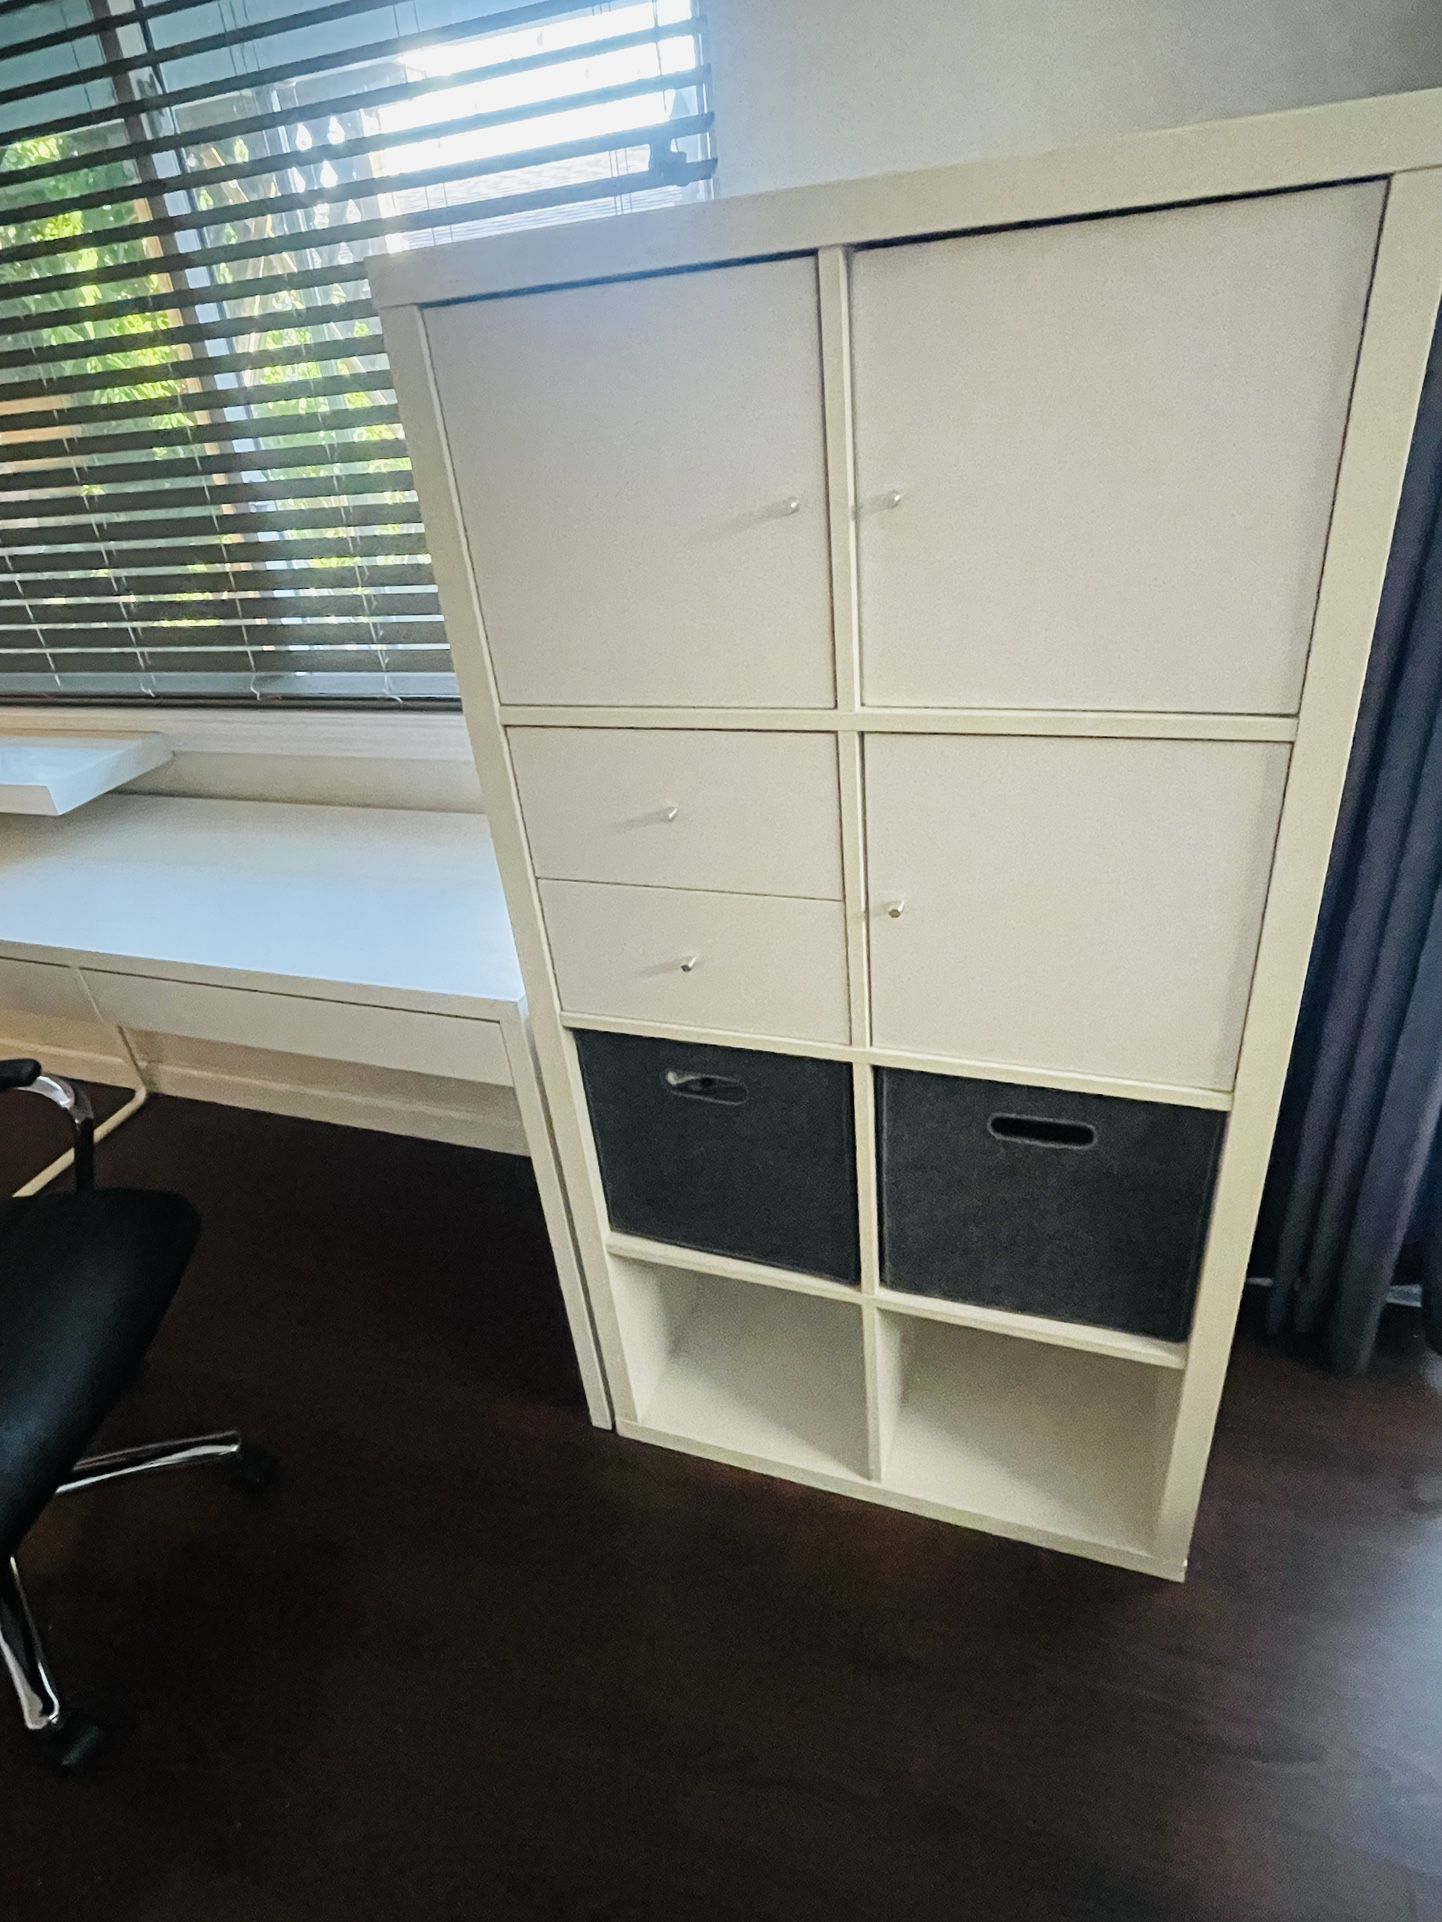 Shelf unit with doors and Drawers, white.